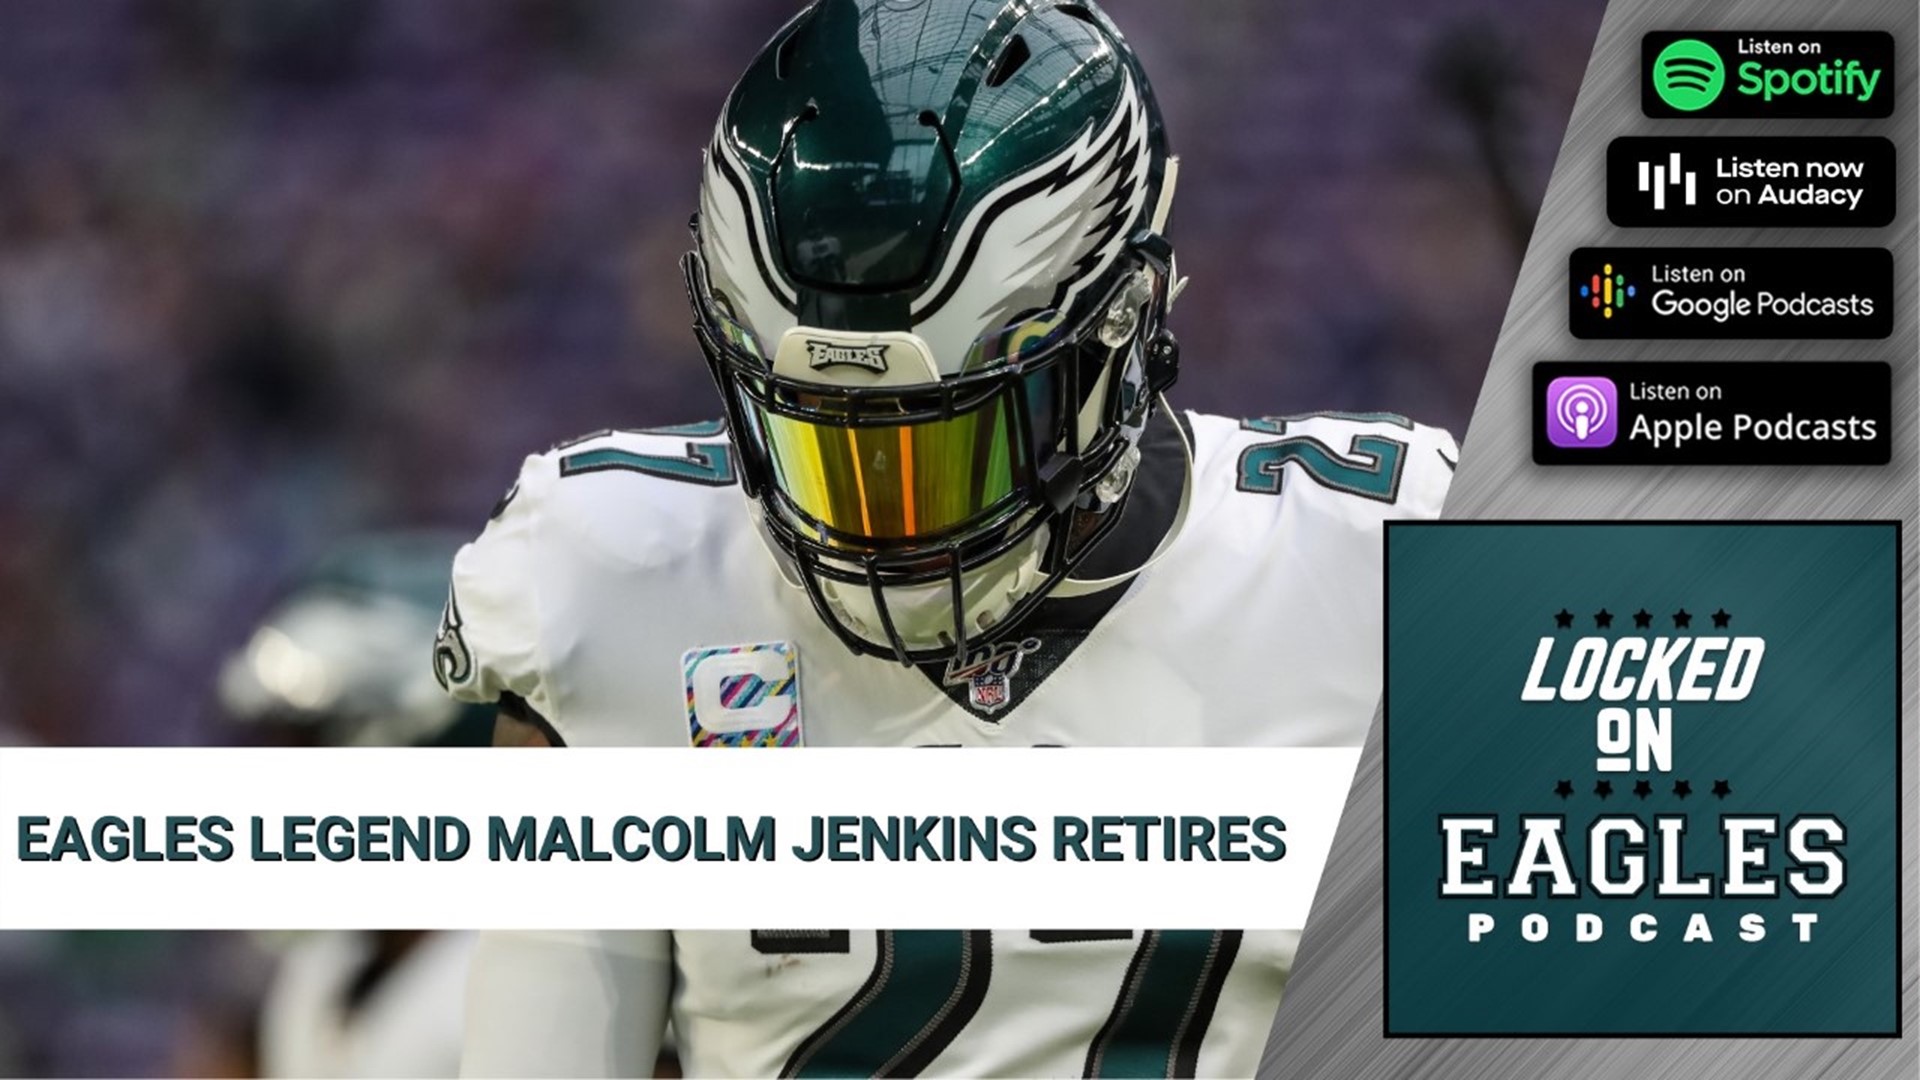 Former Eagles and Saints safety Malcolm Jenkins announced his retirement on Wednesday. Locked On Eagles host Louie DiBiase broke down his career in Philadelphia.